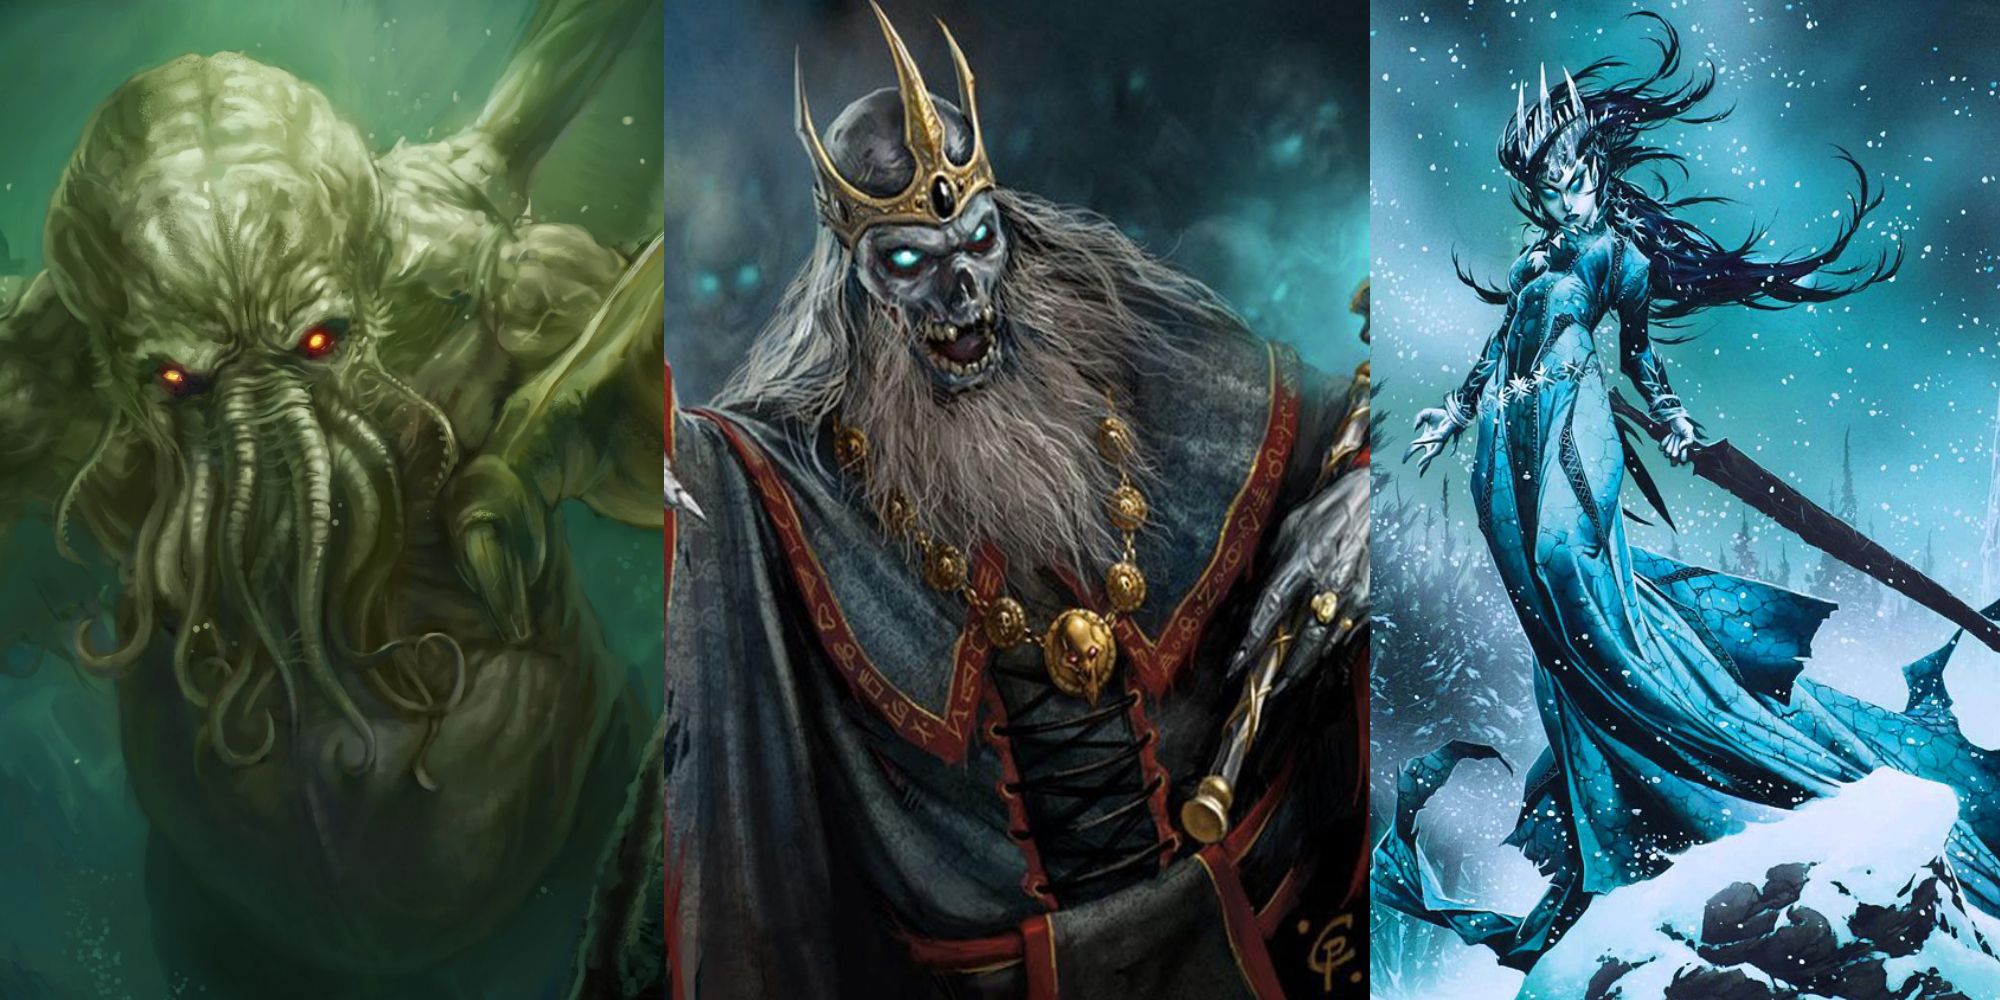 The great old one, the undying and the archfey patrons.